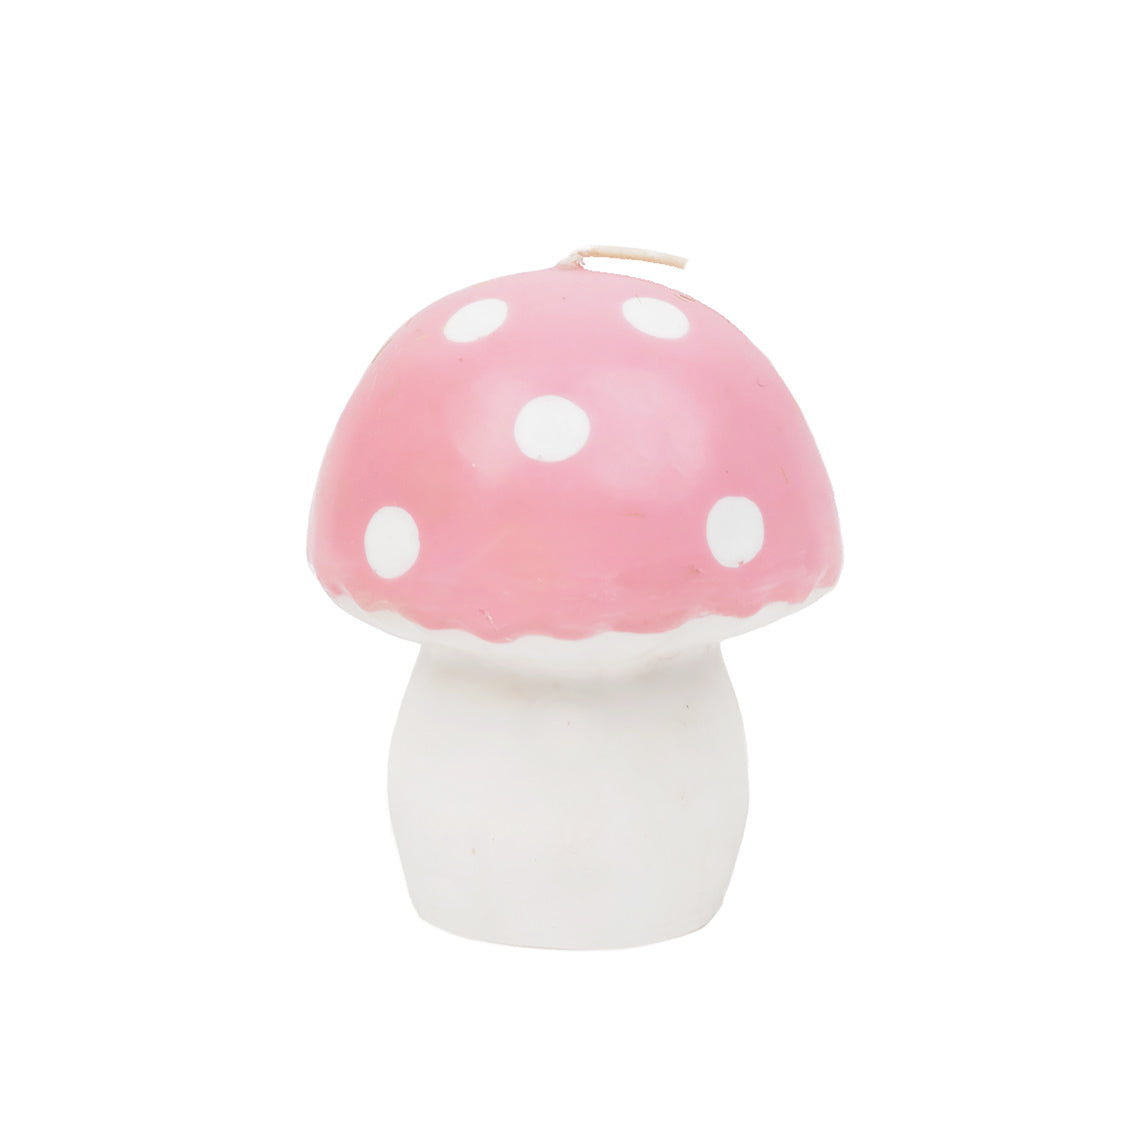 Pink Toadstool Mushroom Candle - Large by penny black